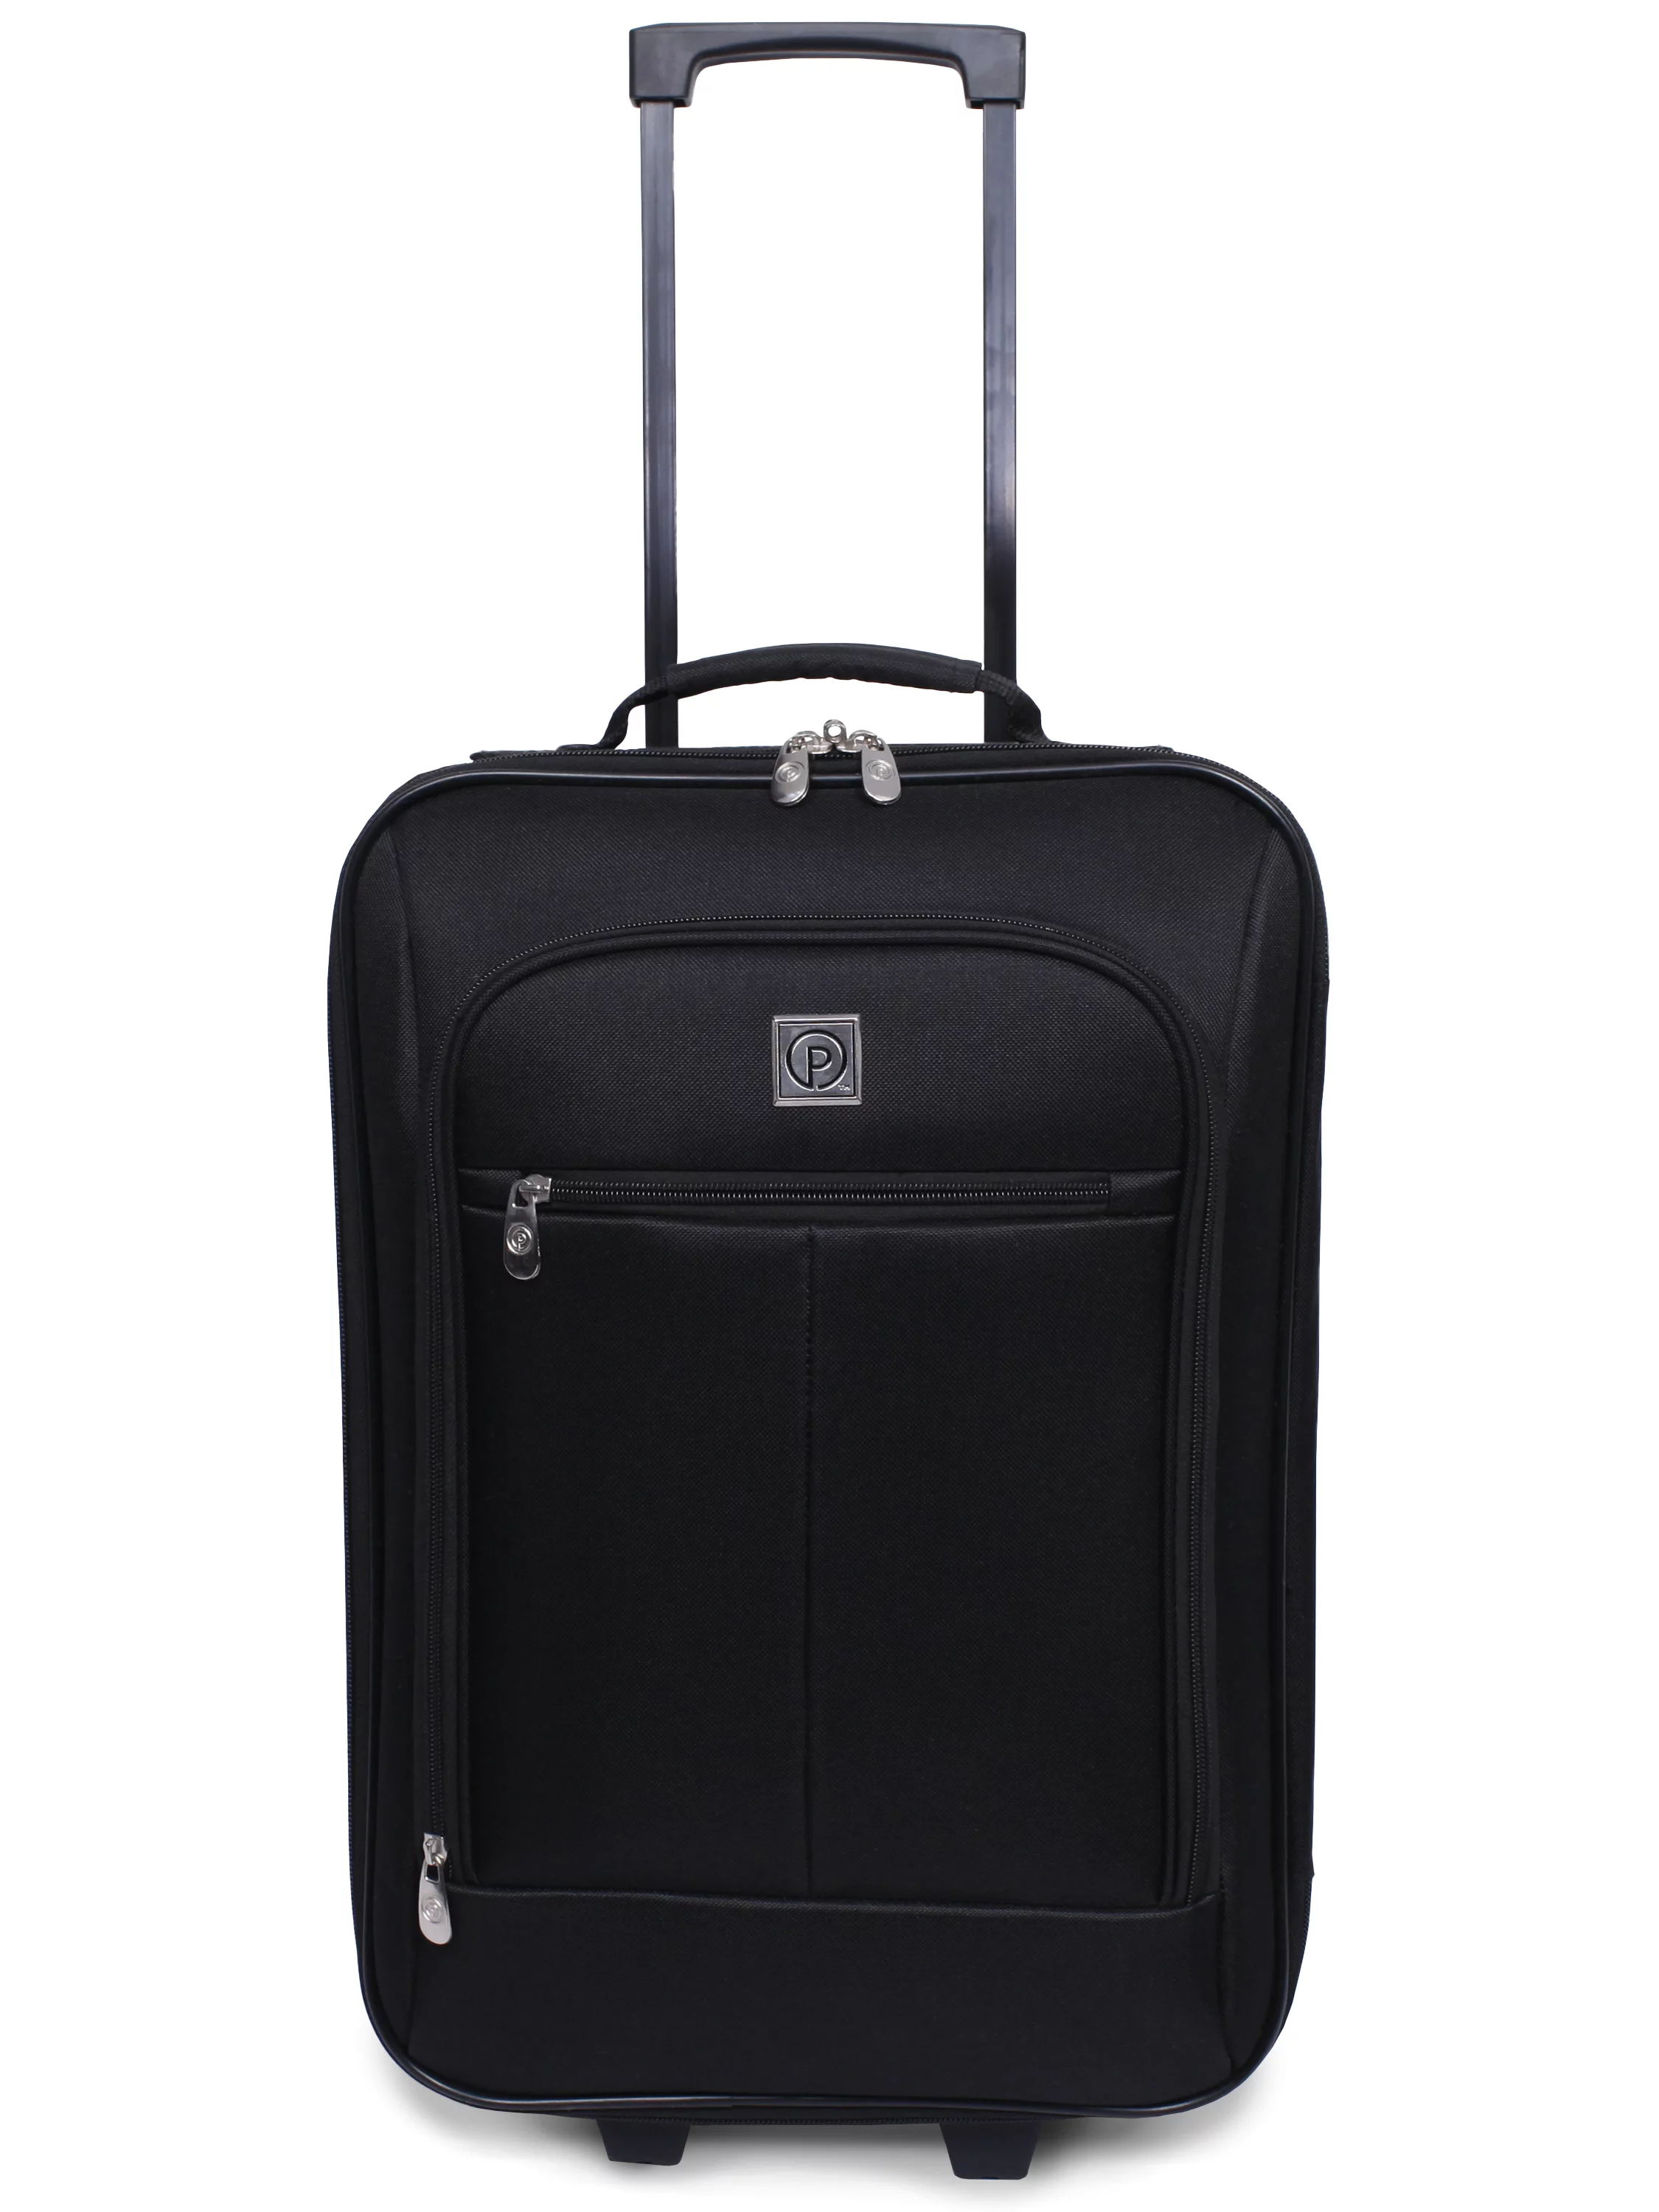 Protege Pilot Case 18" Carry-On Luggage (Walmart Exclusive)